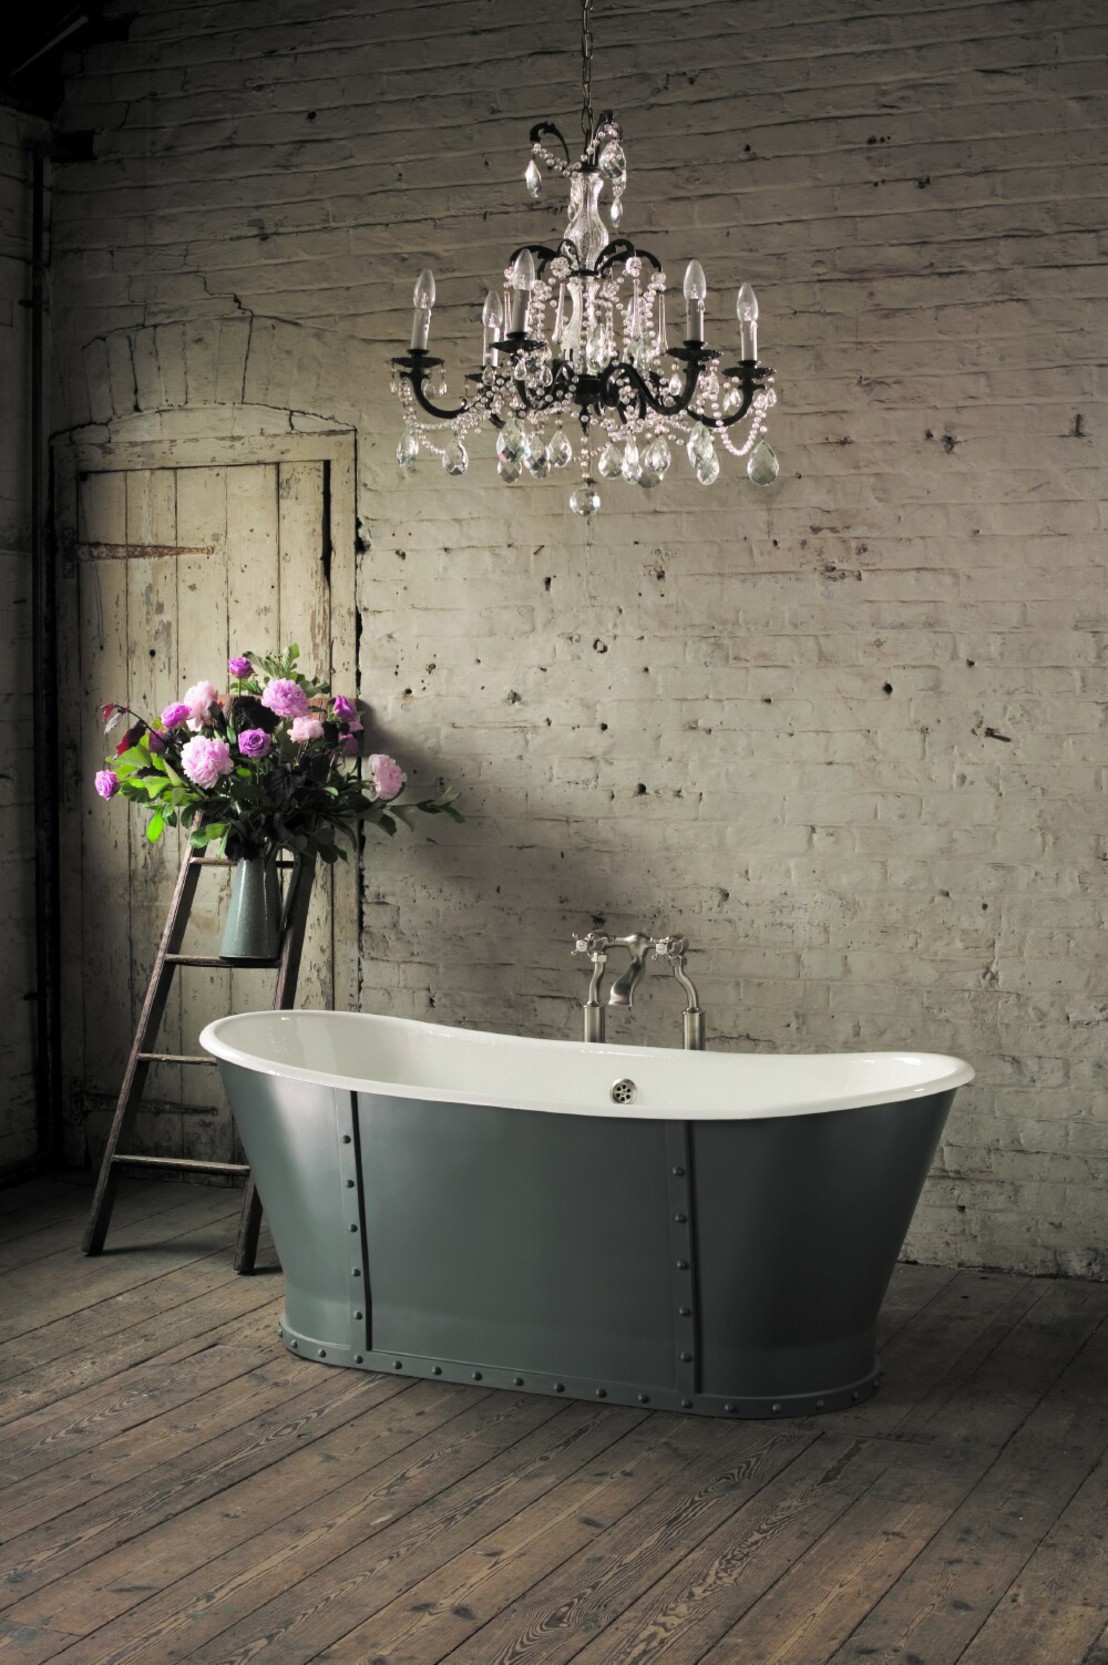 Splendid Rustic French Style  Bathroom Interior with luxury chandelier rough walls and wooden floors